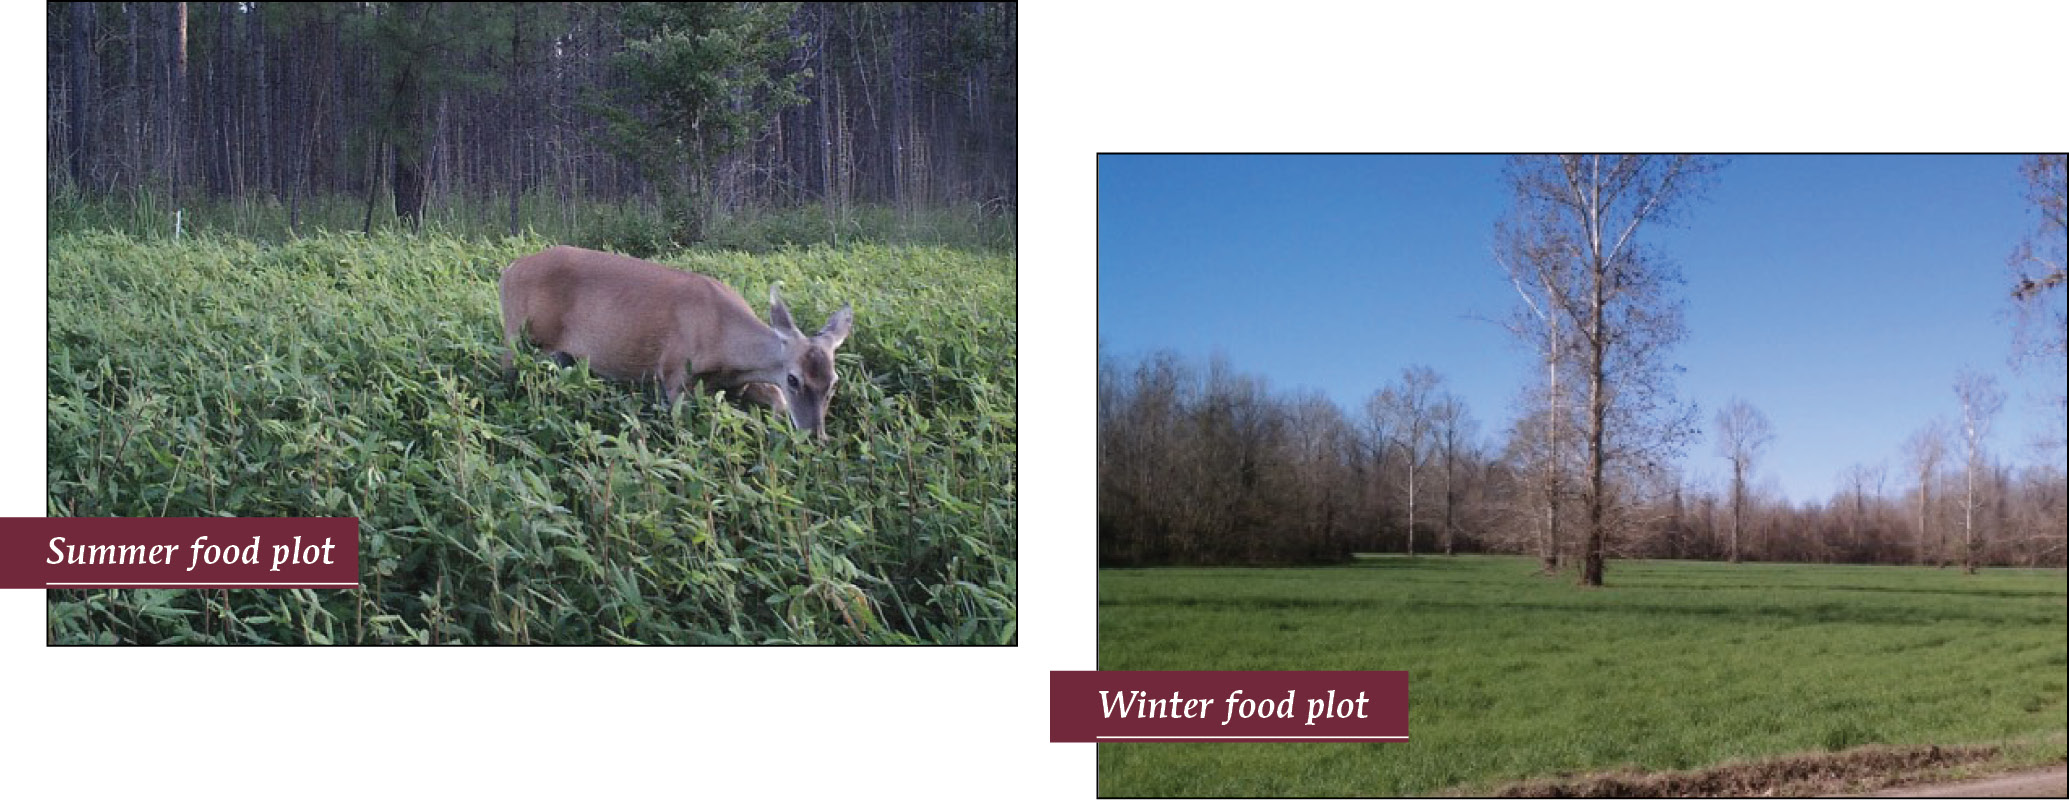 Figure 2A. A deer is foraging in a field of agronomic plants. Figure 2B. An open area with green grass and leafless trees in the background.